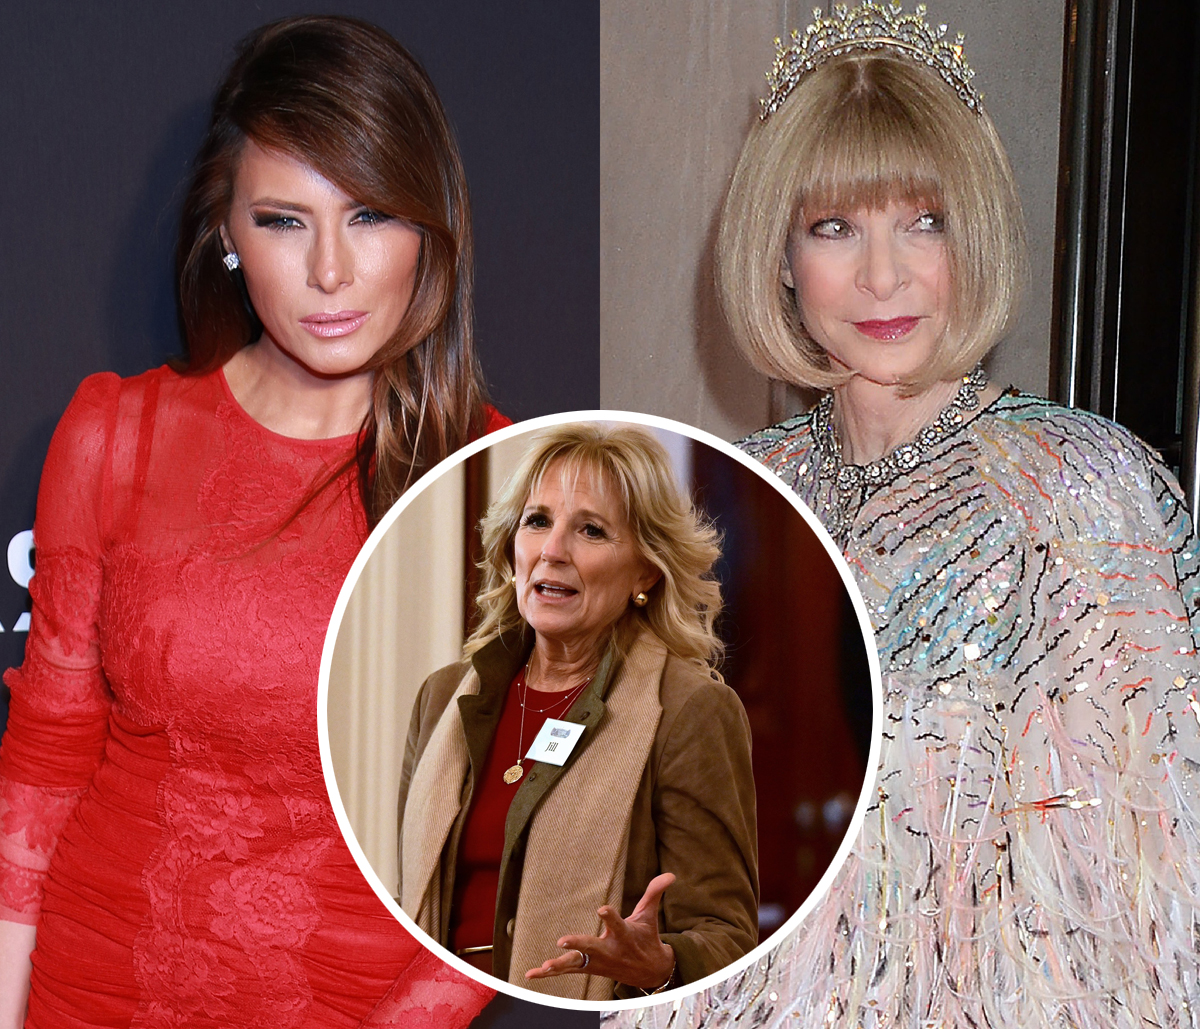 #Melania Trump Slams Anna Wintour For Putting Dr. Jill Biden On The Cover Of Vogue & Not Her